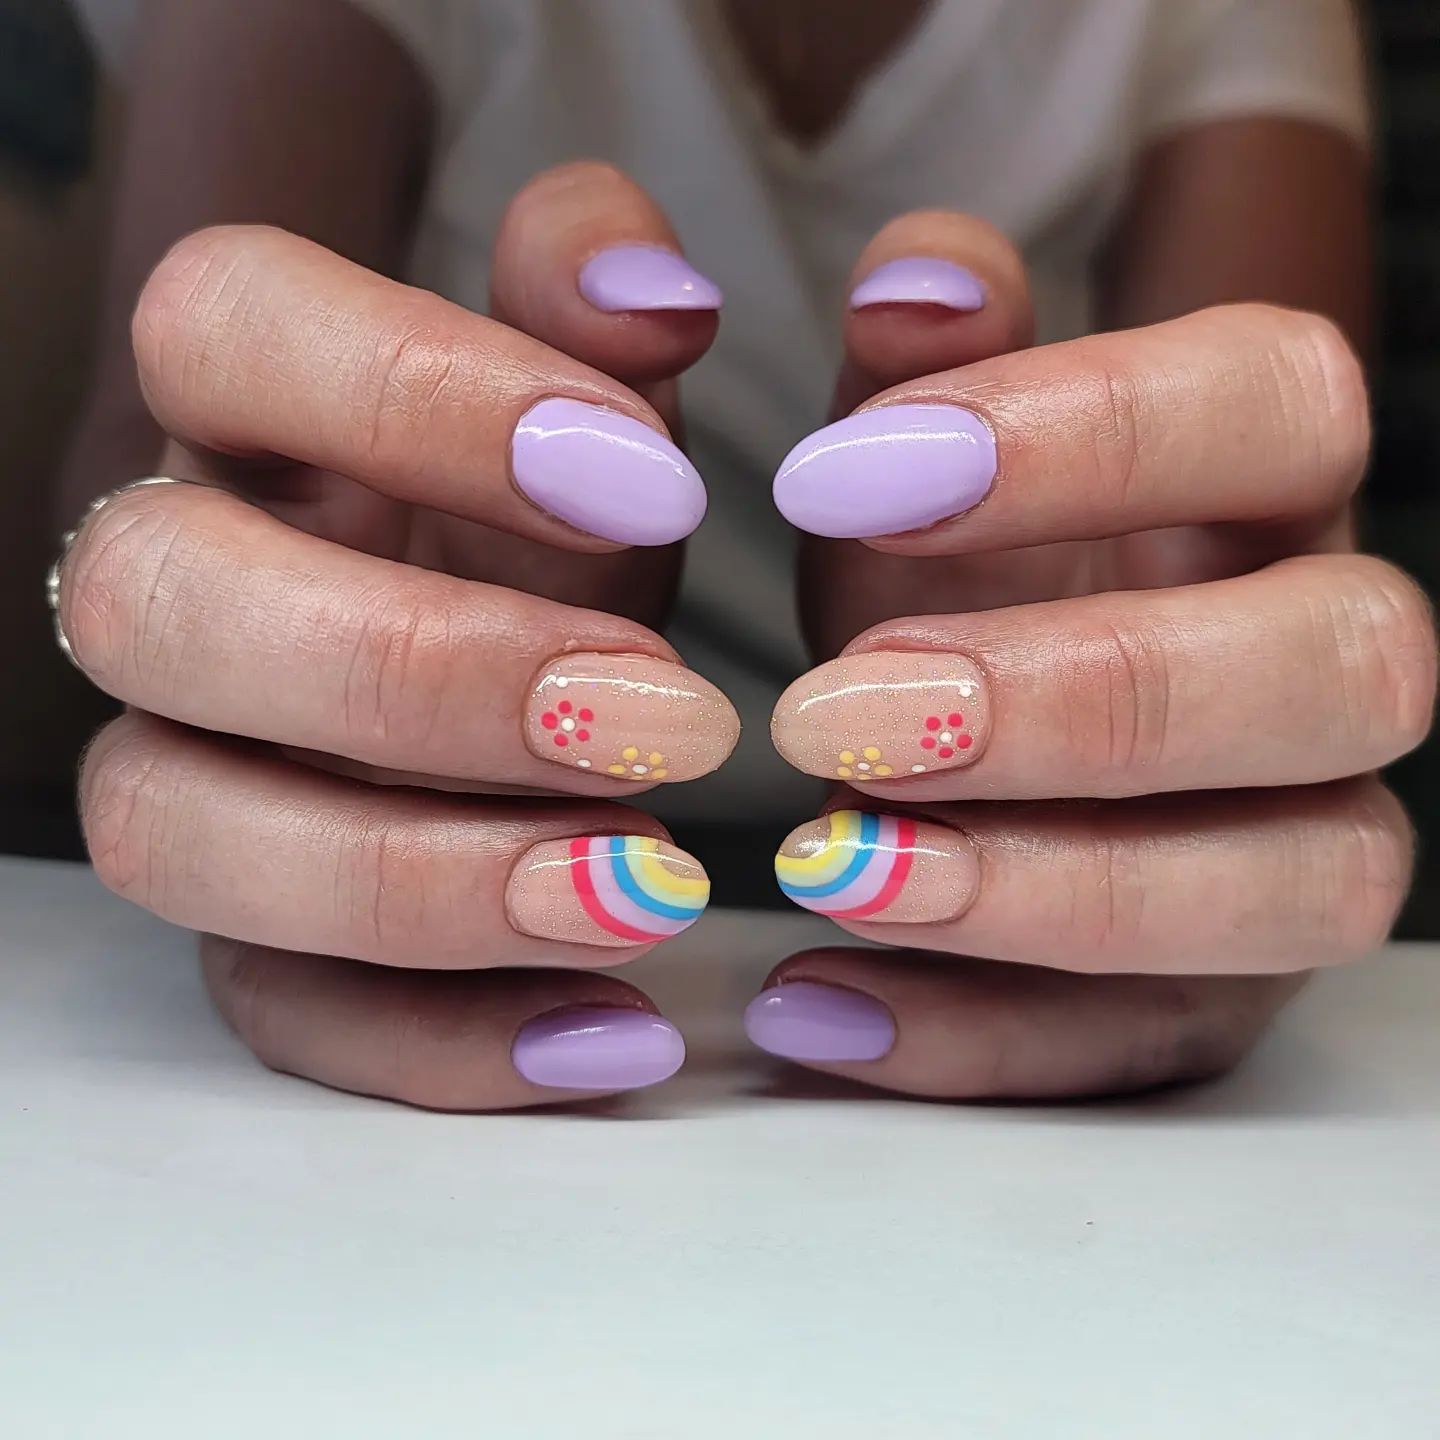 Here is an amazing nail design idea for summer. Light purple is cool for summer especially but why not having a rainbow and floral accent nails?